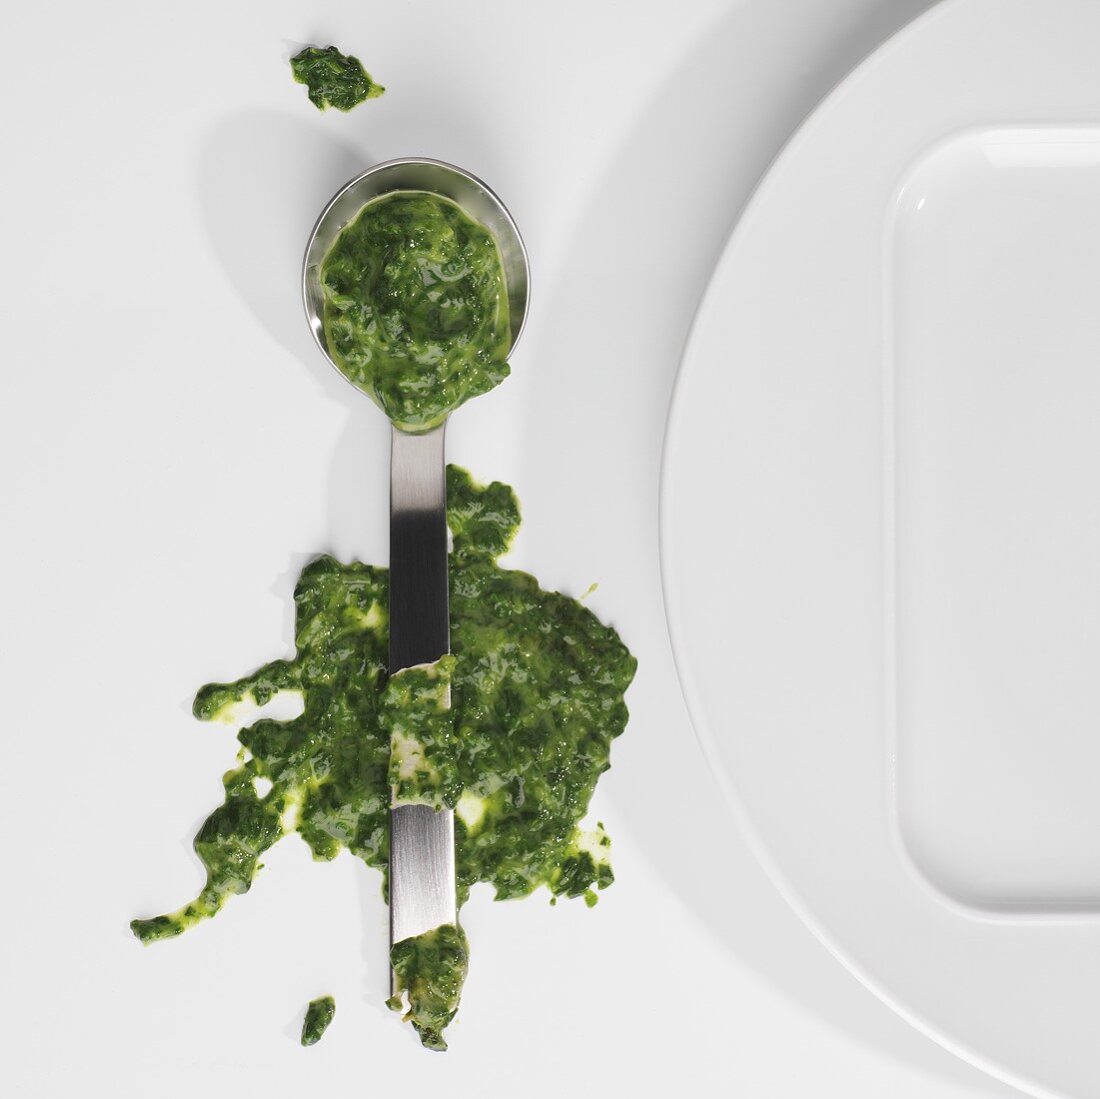 Blob of spinach on spoon